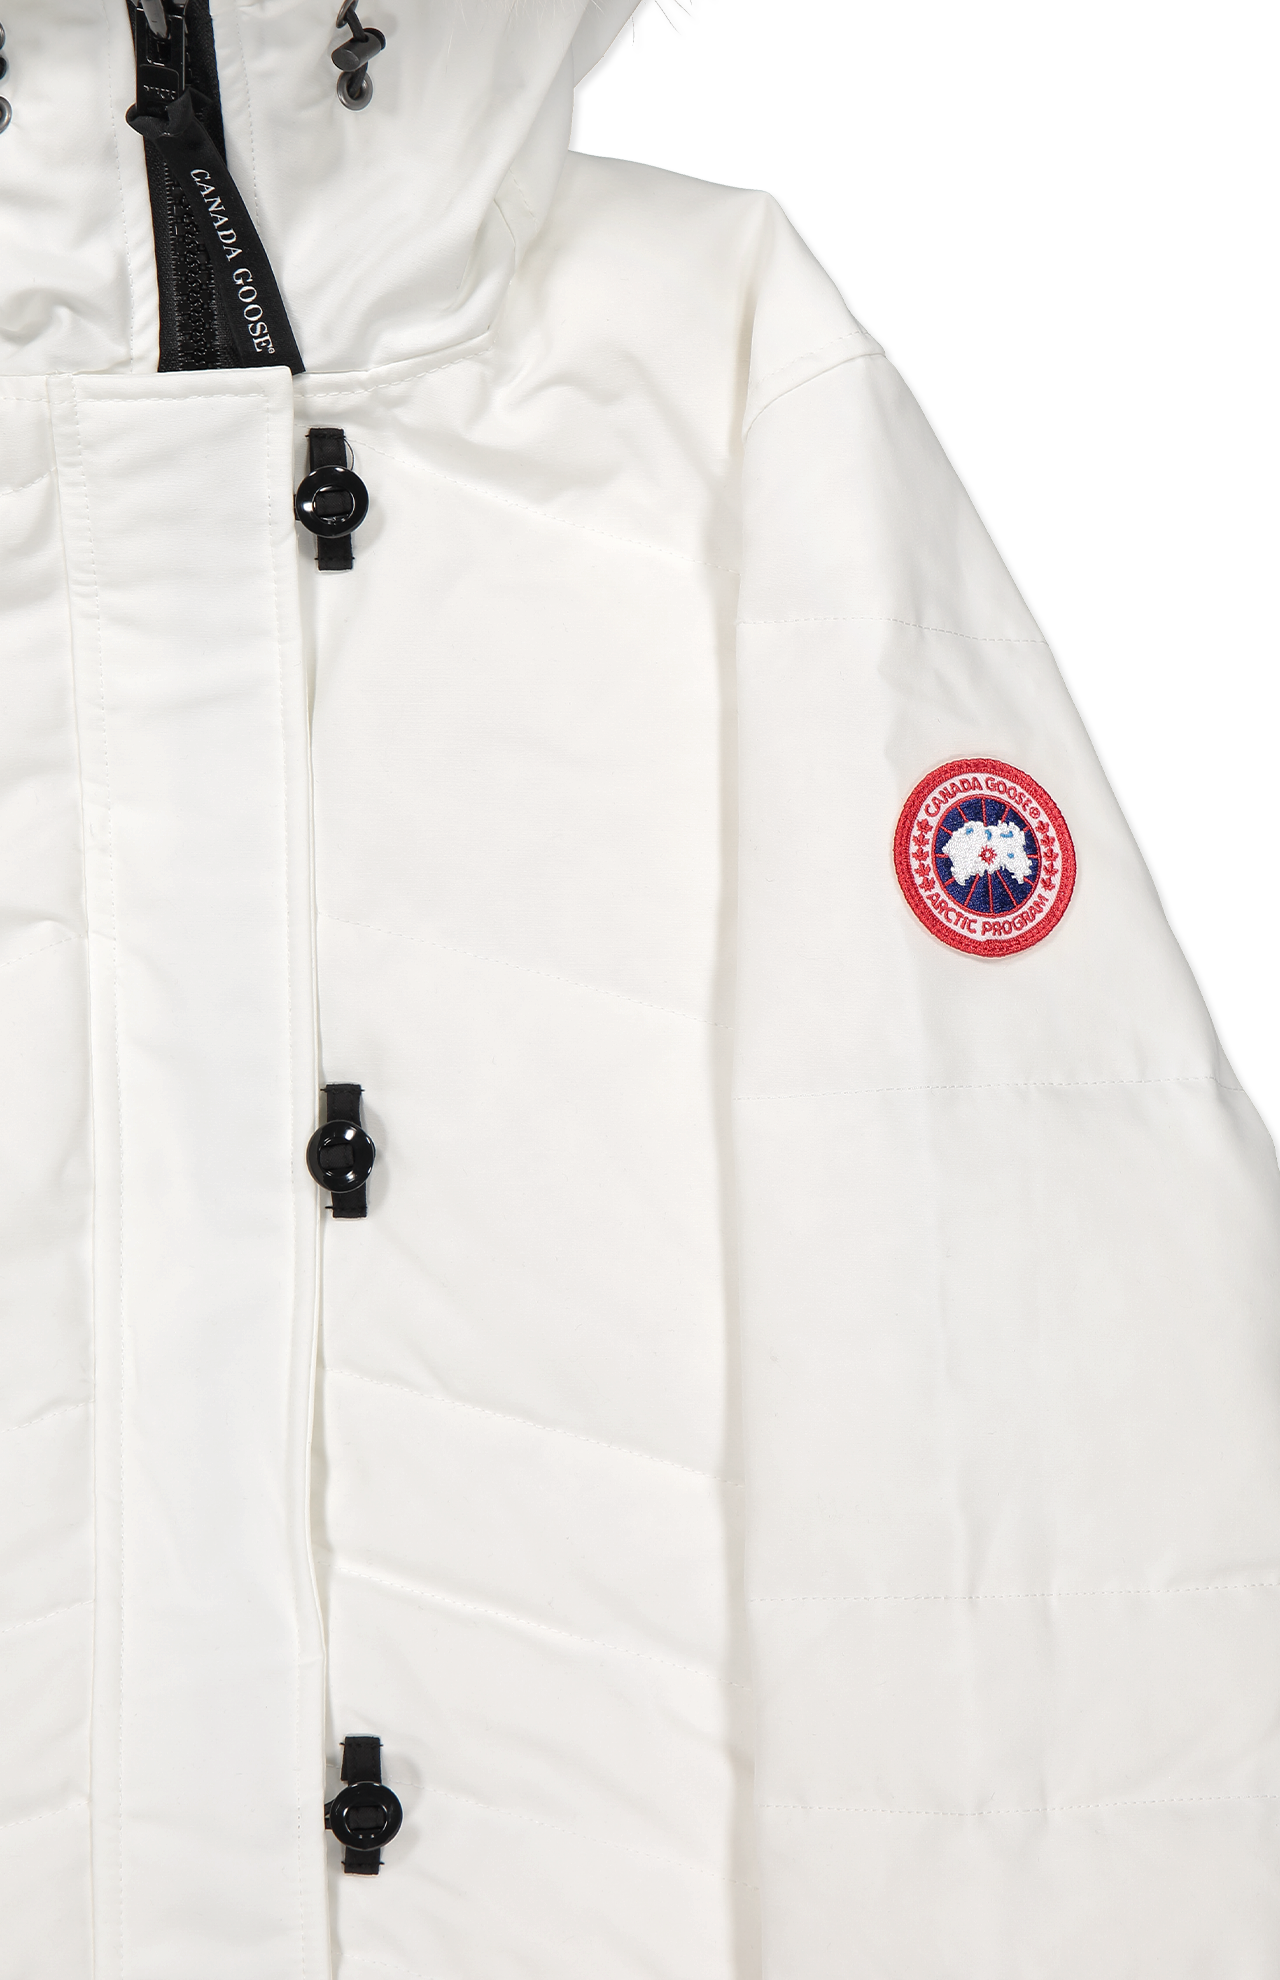 Canada Goose Lorette Parka in Star White - Patch Detail Image  (6955446173811)